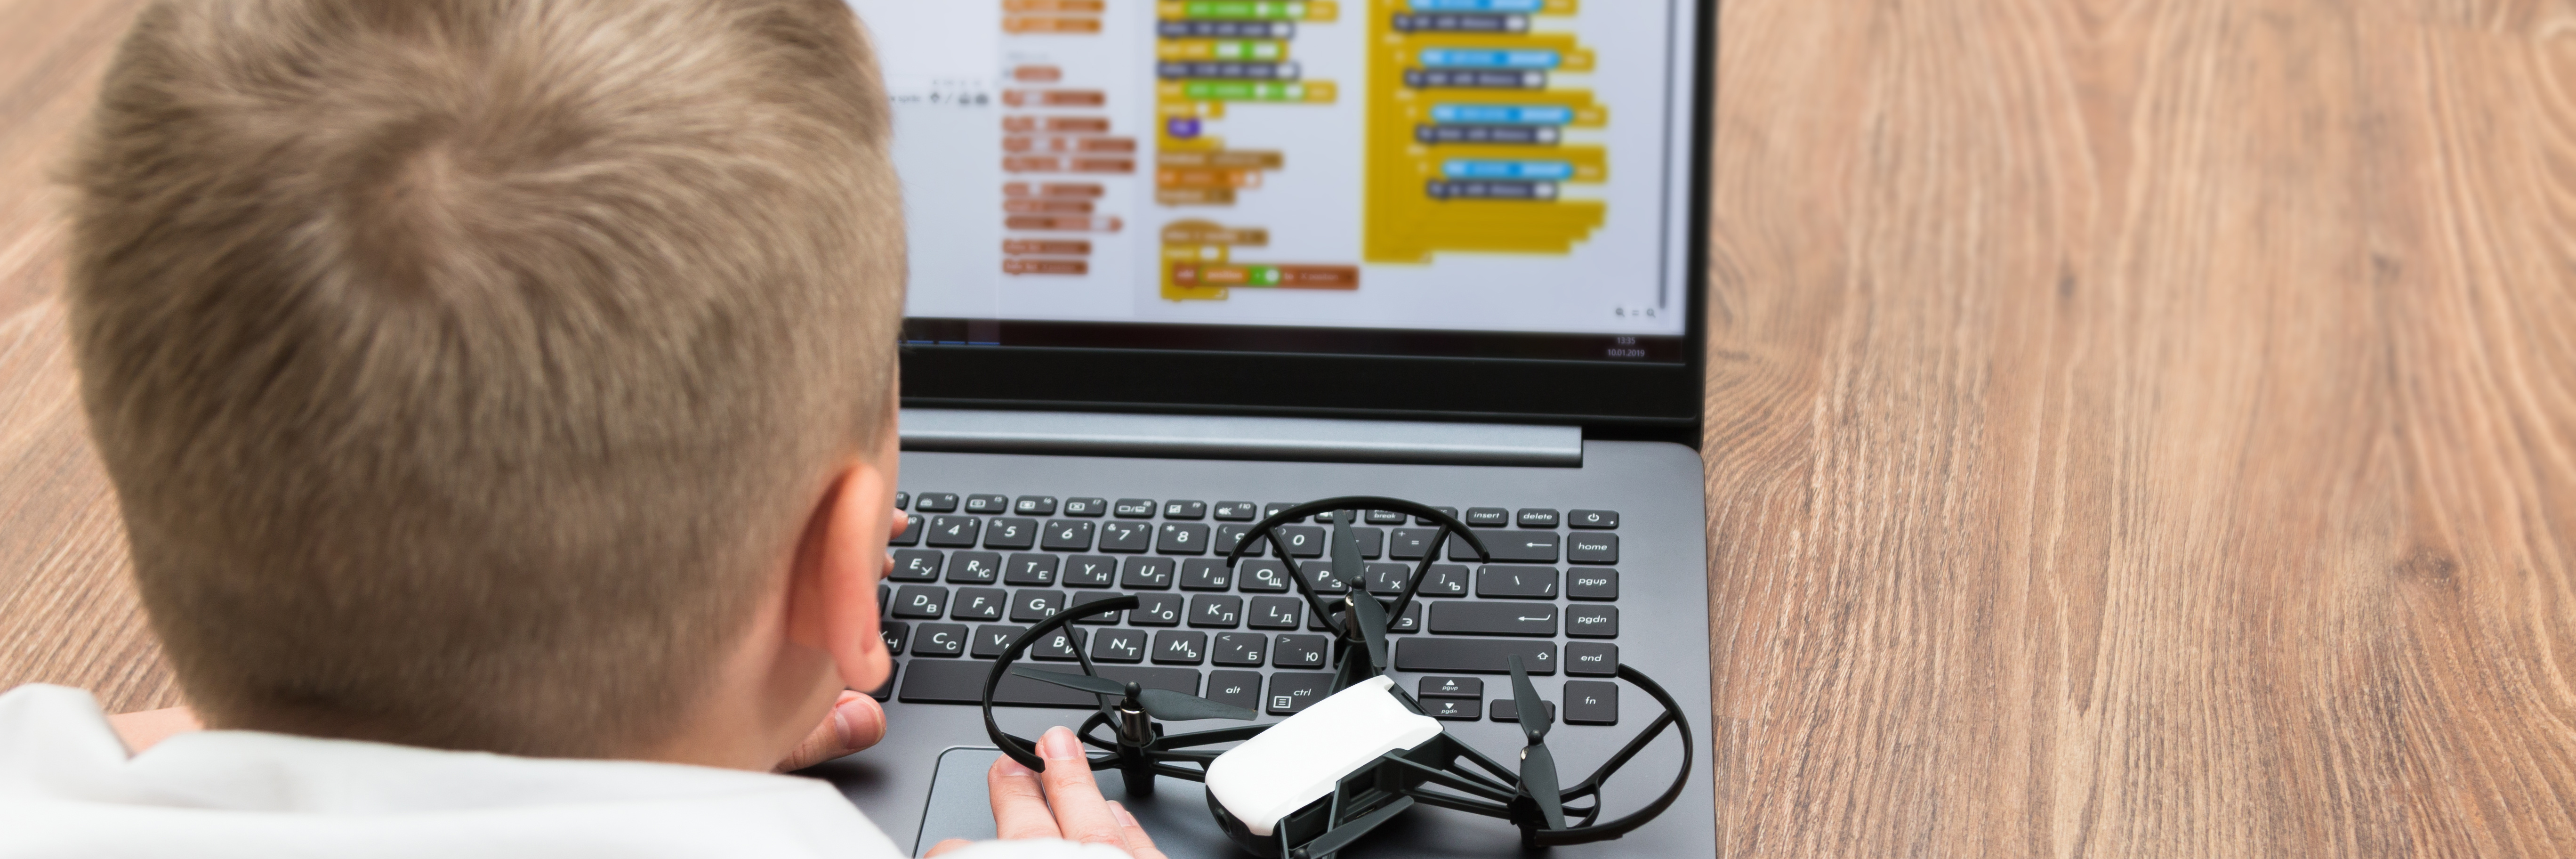 child using scratch om a laptop with a drone